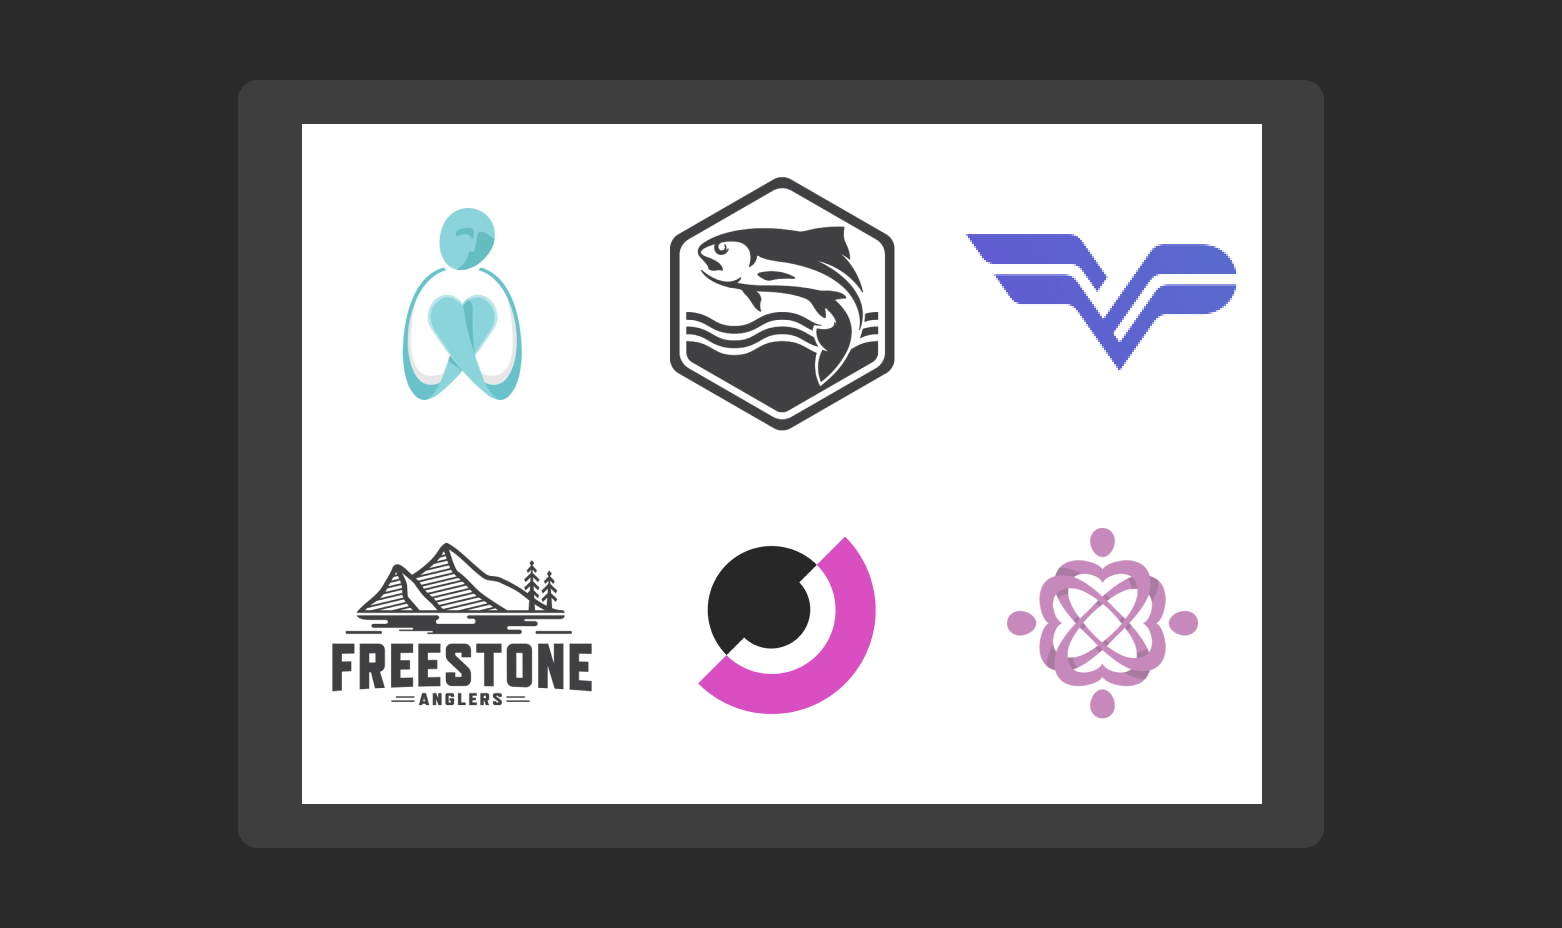 Six identity samples including illustrated fish, mountains and trees, and group of people interweaved